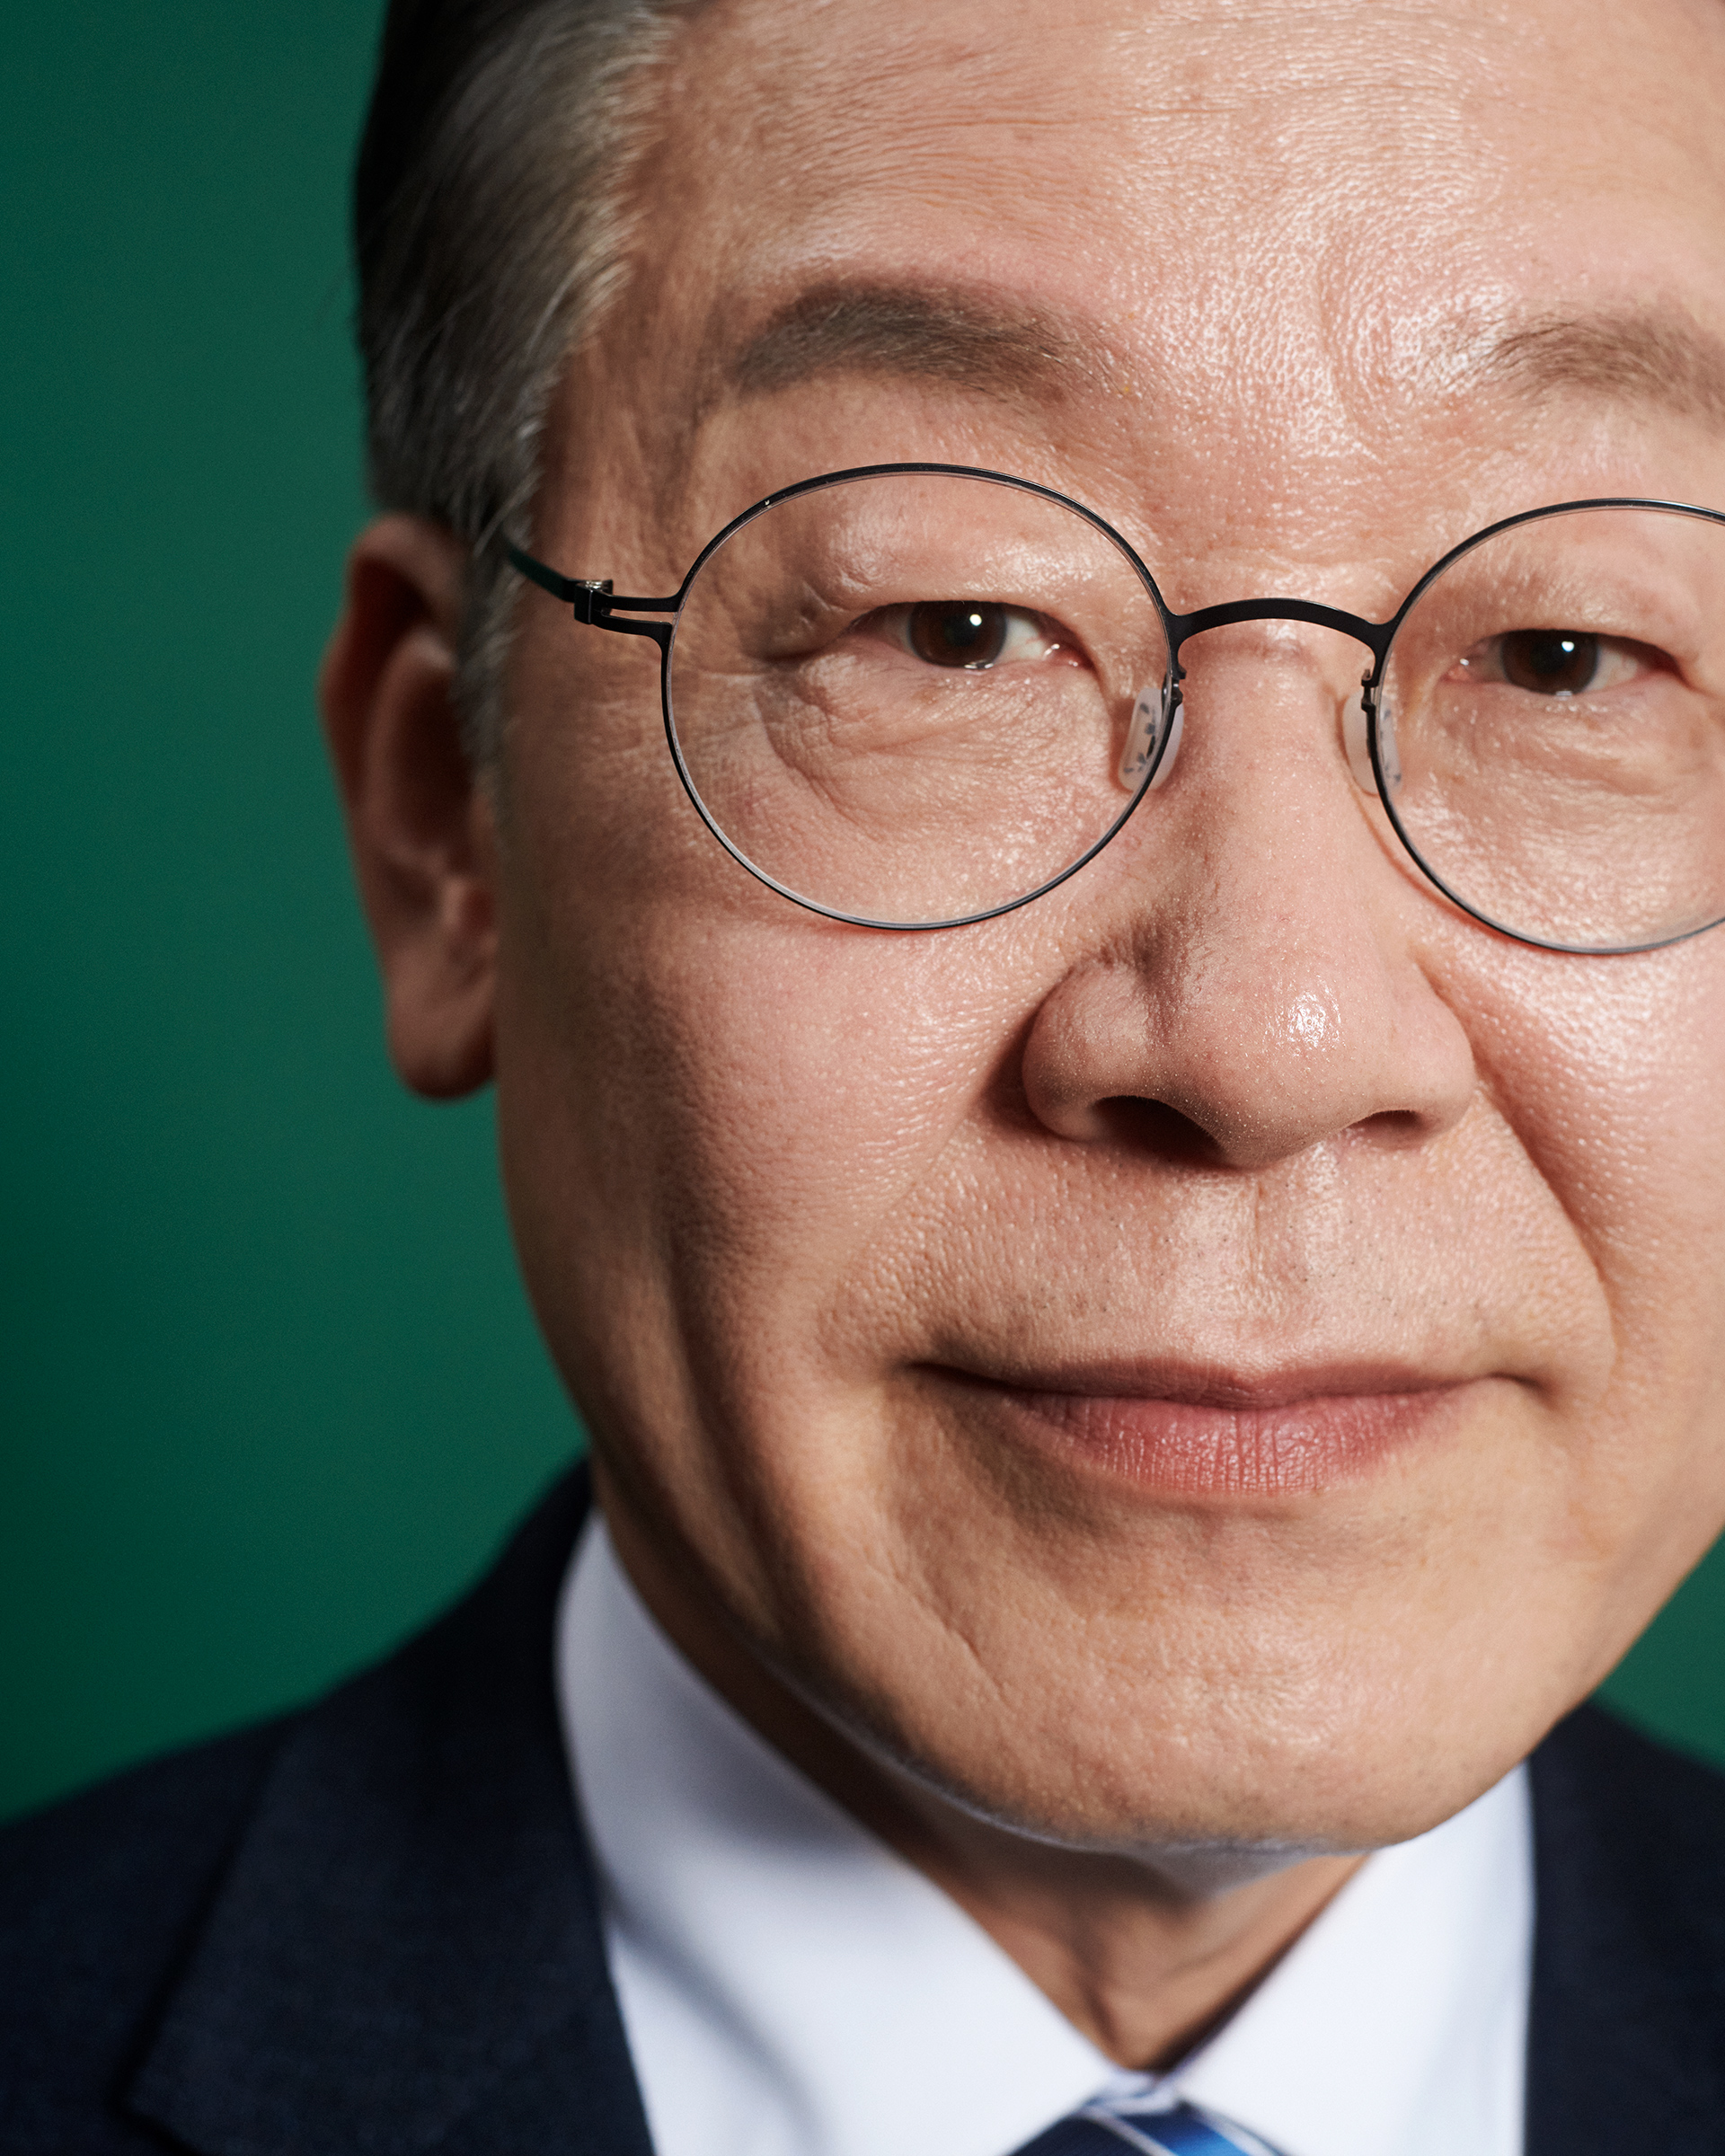 Lee Jae-myung, the presidential candidate of the ruling Democratic Party, at his office in the party headquarters in Seoul on March 1 (Peter Ash Lee for TIME)